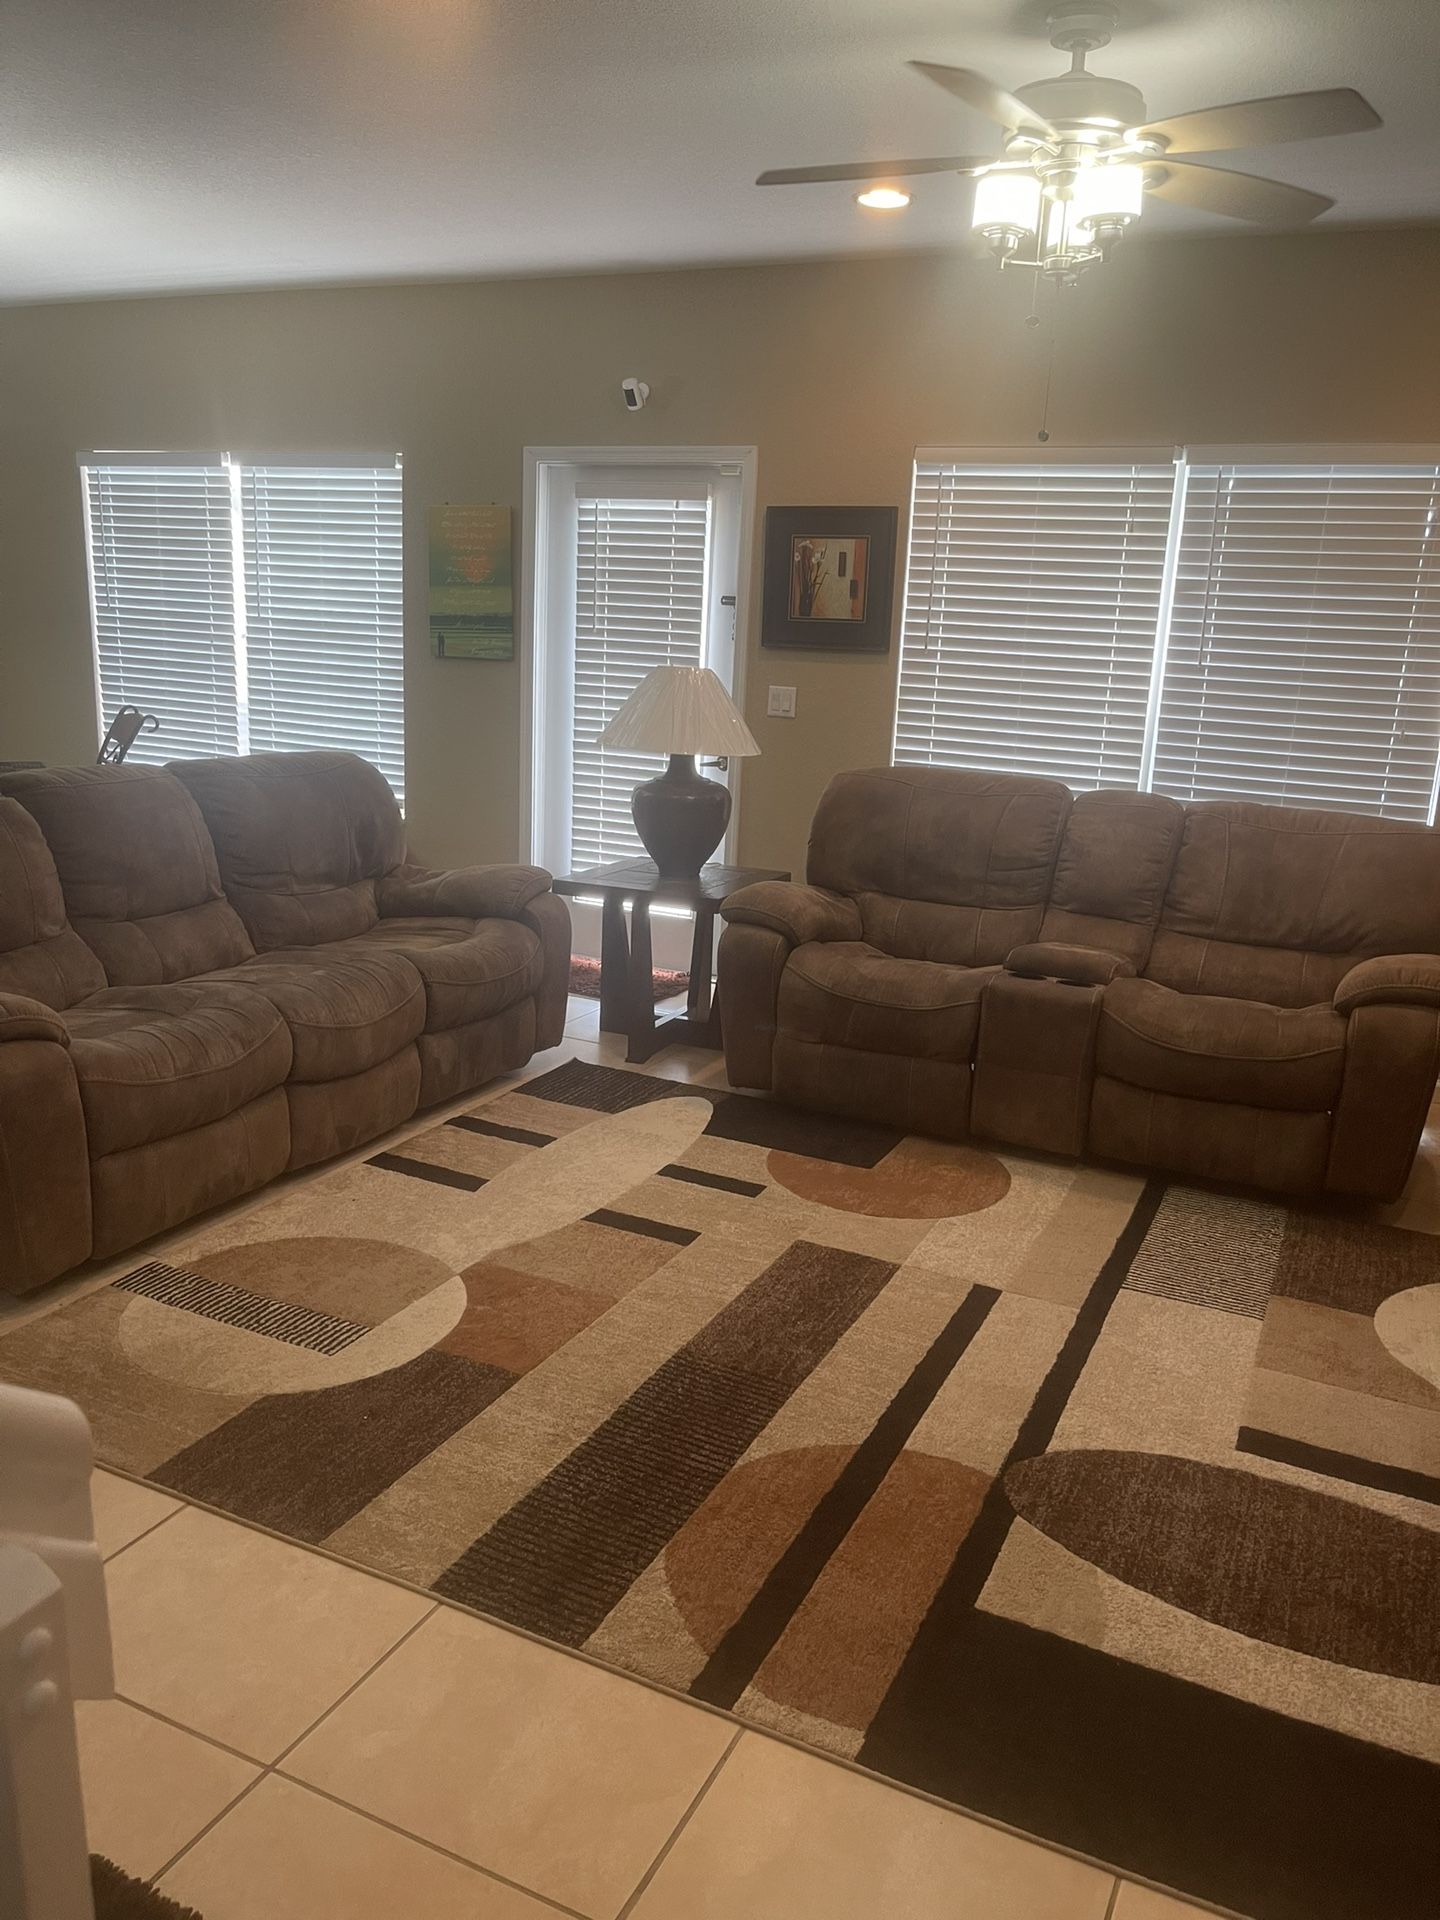 Living Room Recliner Set With Two End Tables And One Lamp